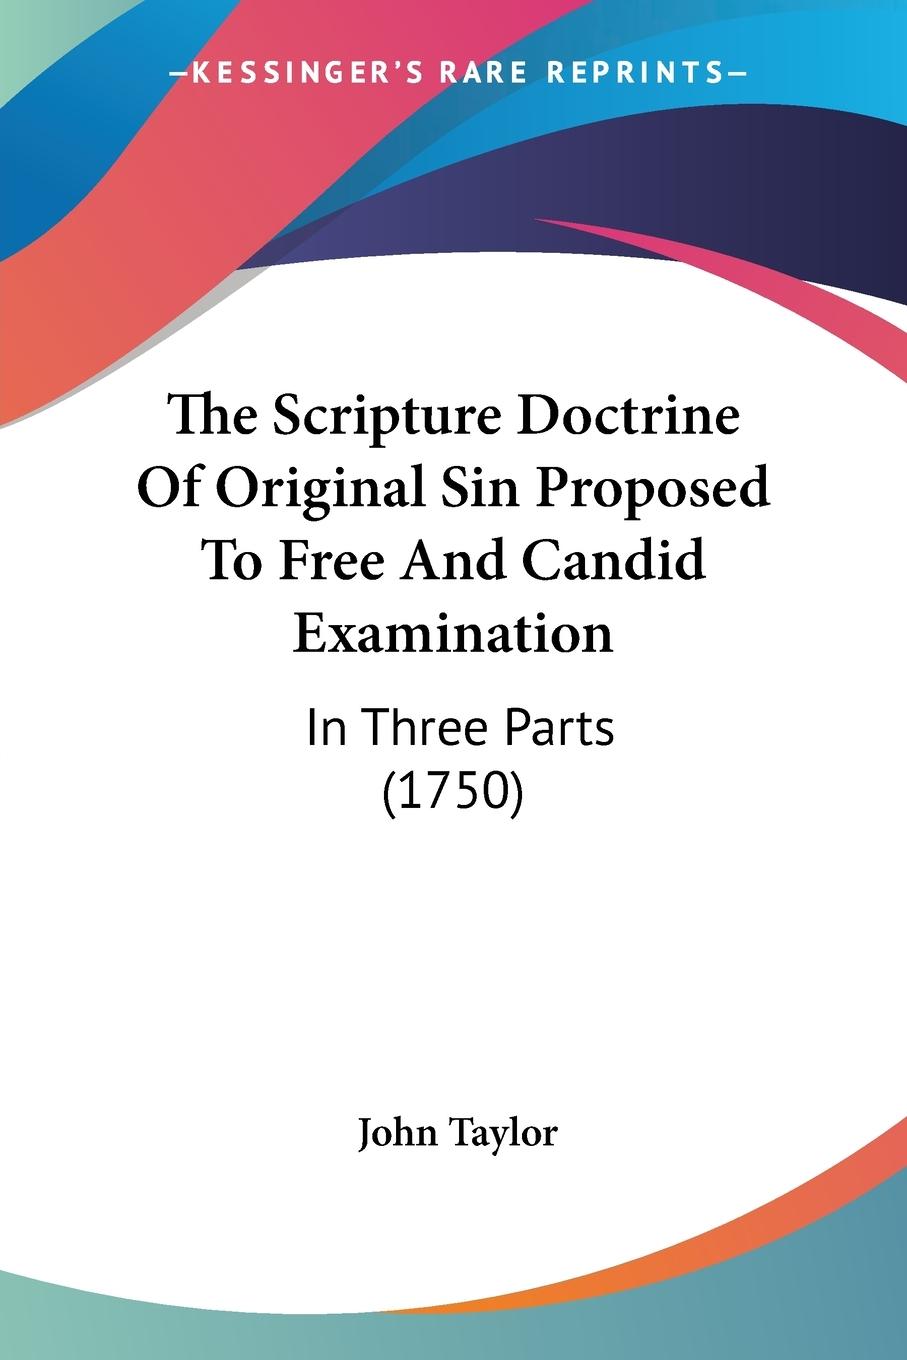 The Scripture Doctrine Of Original Sin Proposed To Free And Candid Examination - Taylor, John